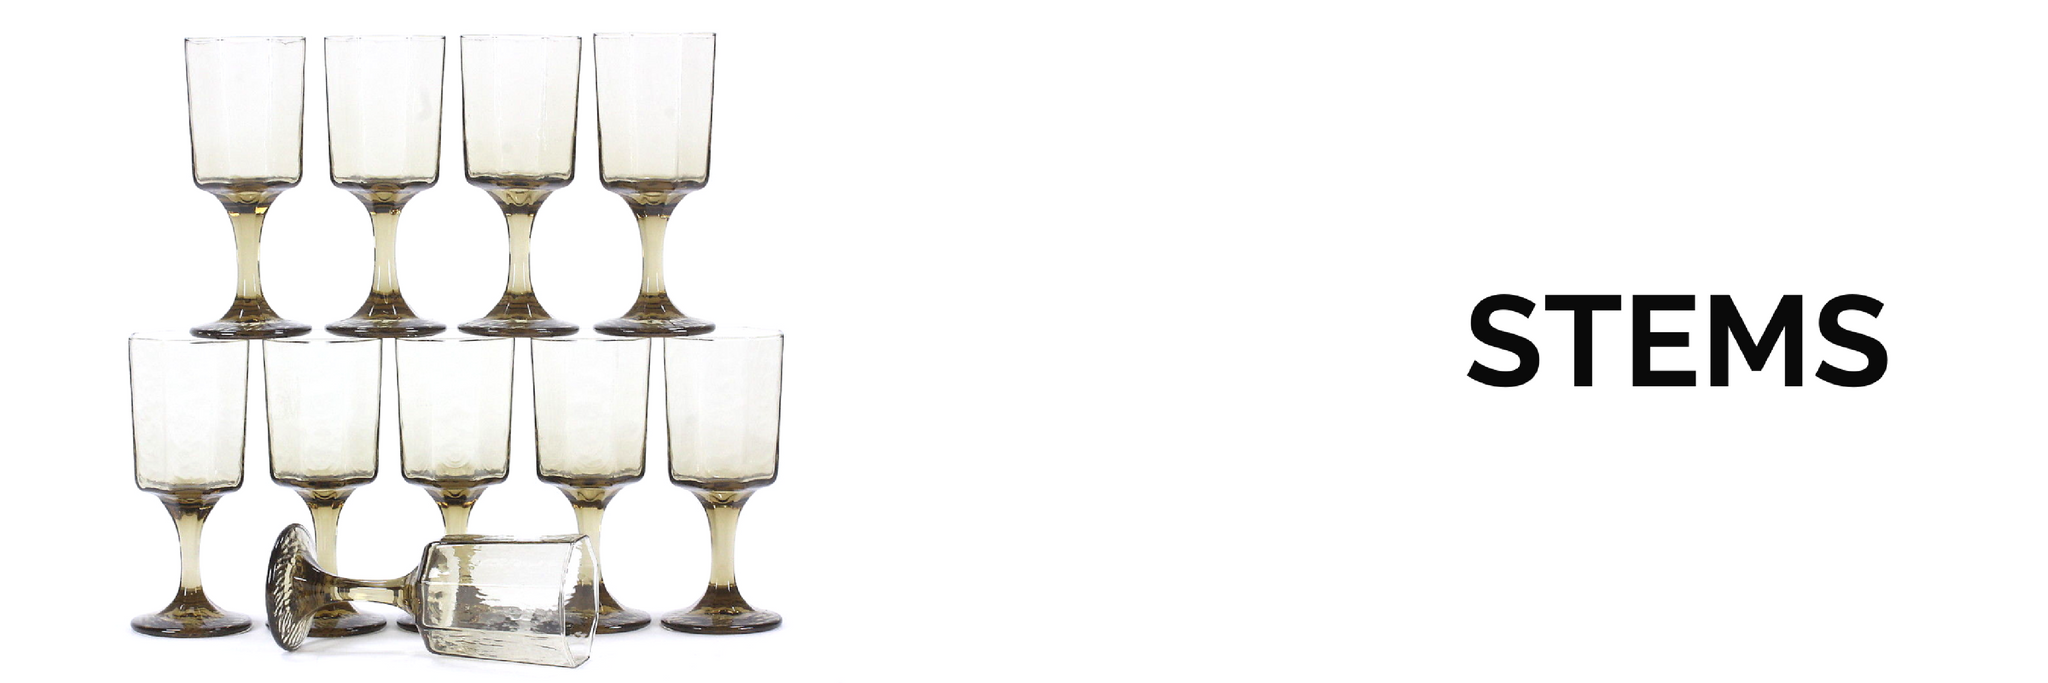 Collection of vintage and antique barware, specifically glasses with stem or stemware for sale